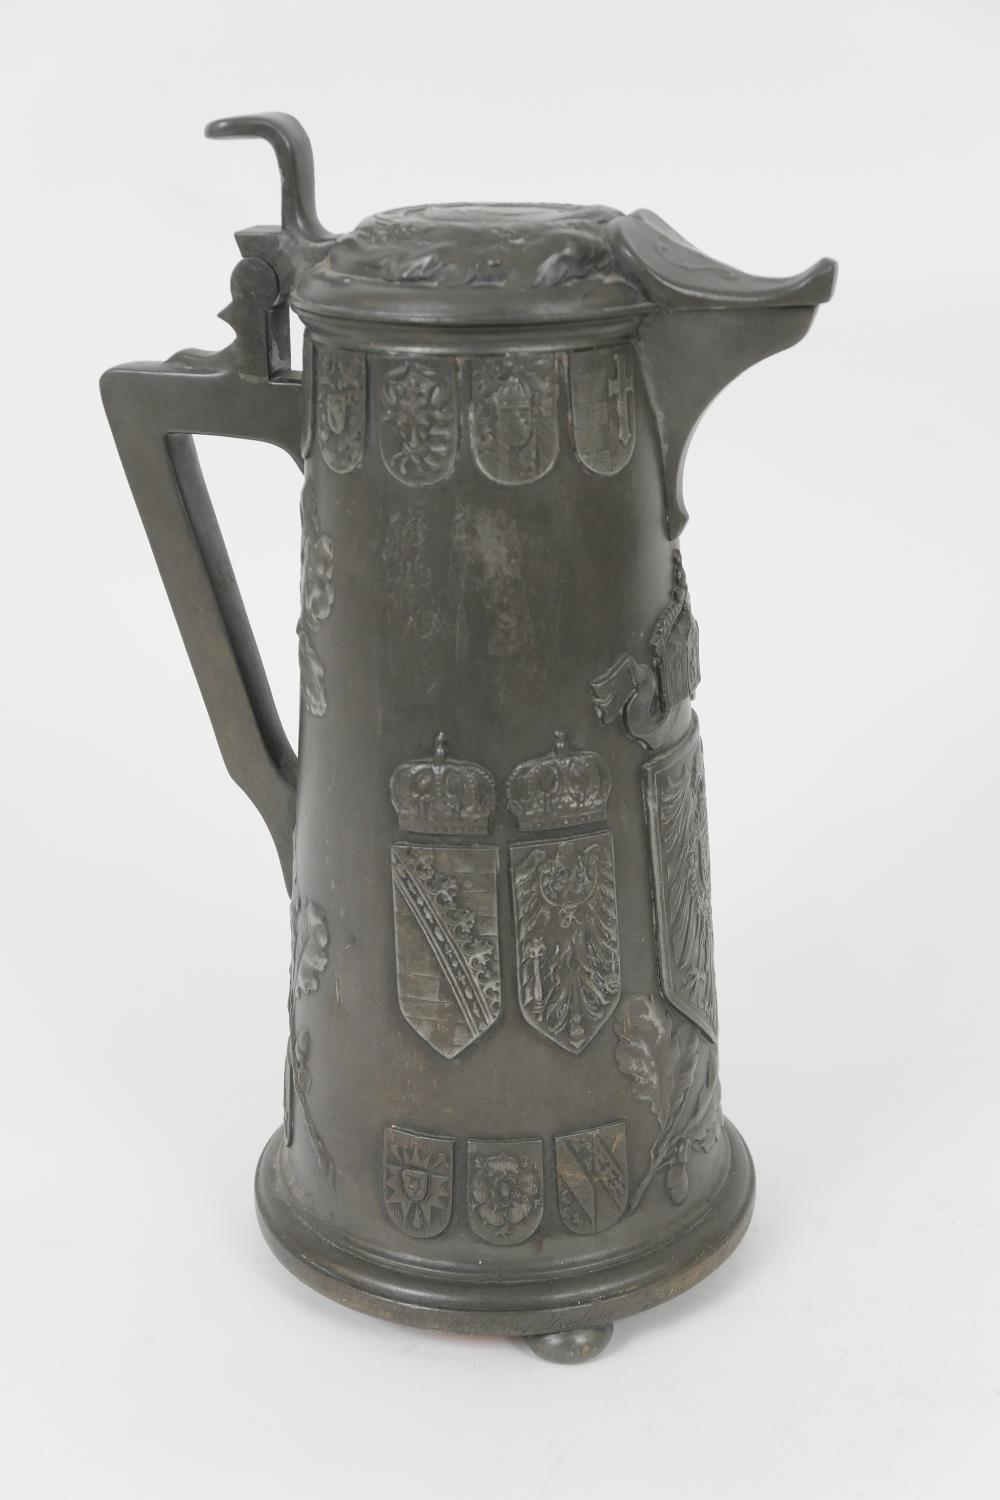 Kayserzinn pewter ale flagon, tapered form, the hinged cover with a profile portrait of Kaiser